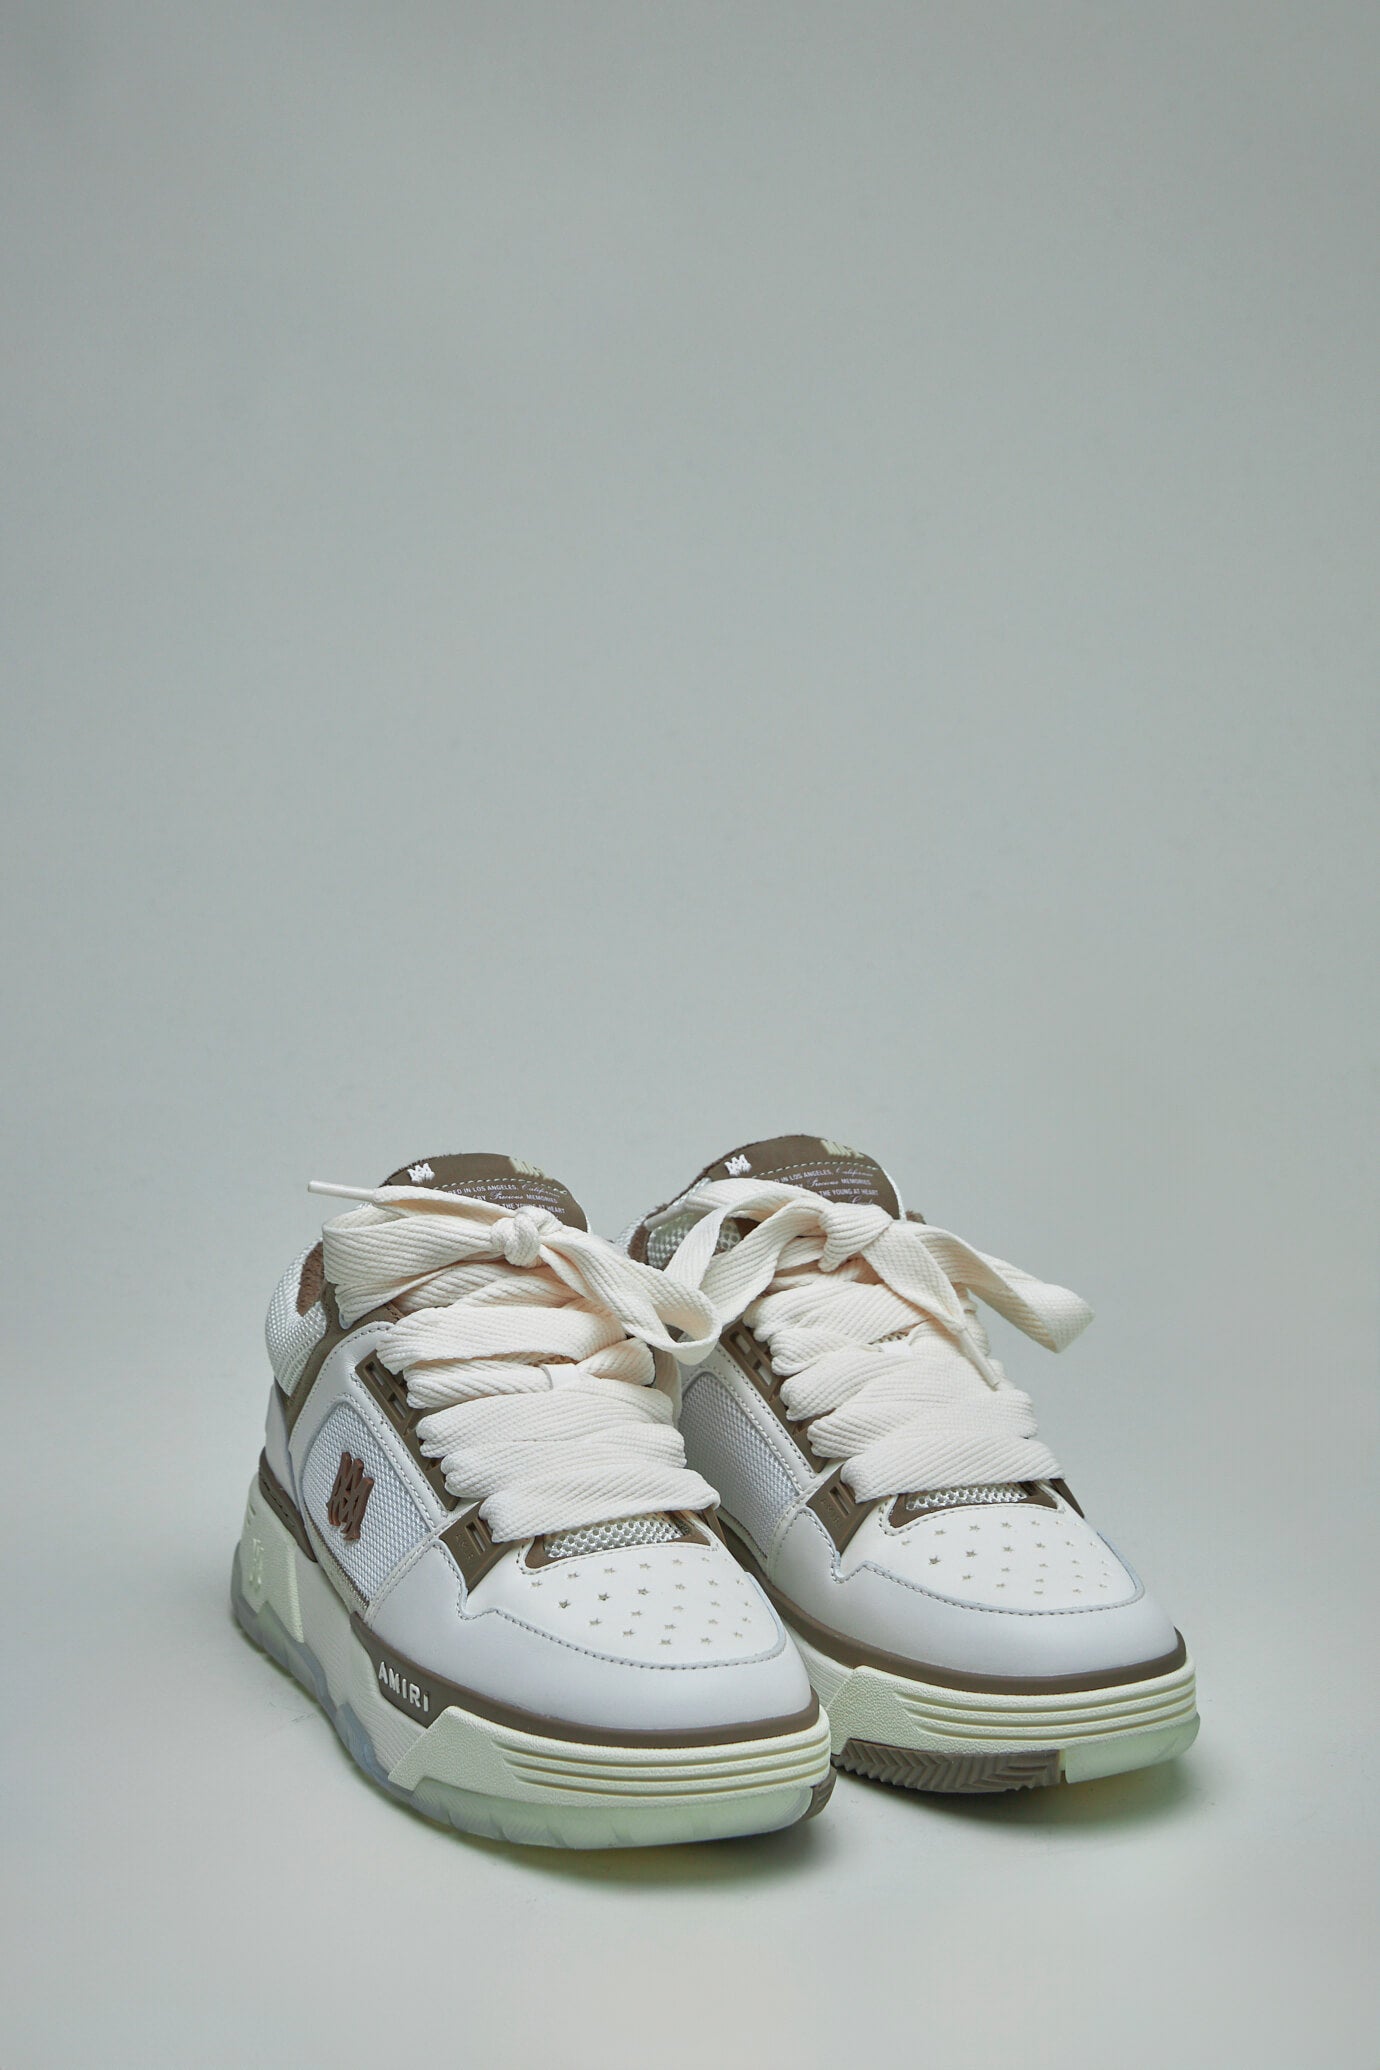 Louis Vuitton Trainer Sneaker For Men Size 8 for Sale in Los